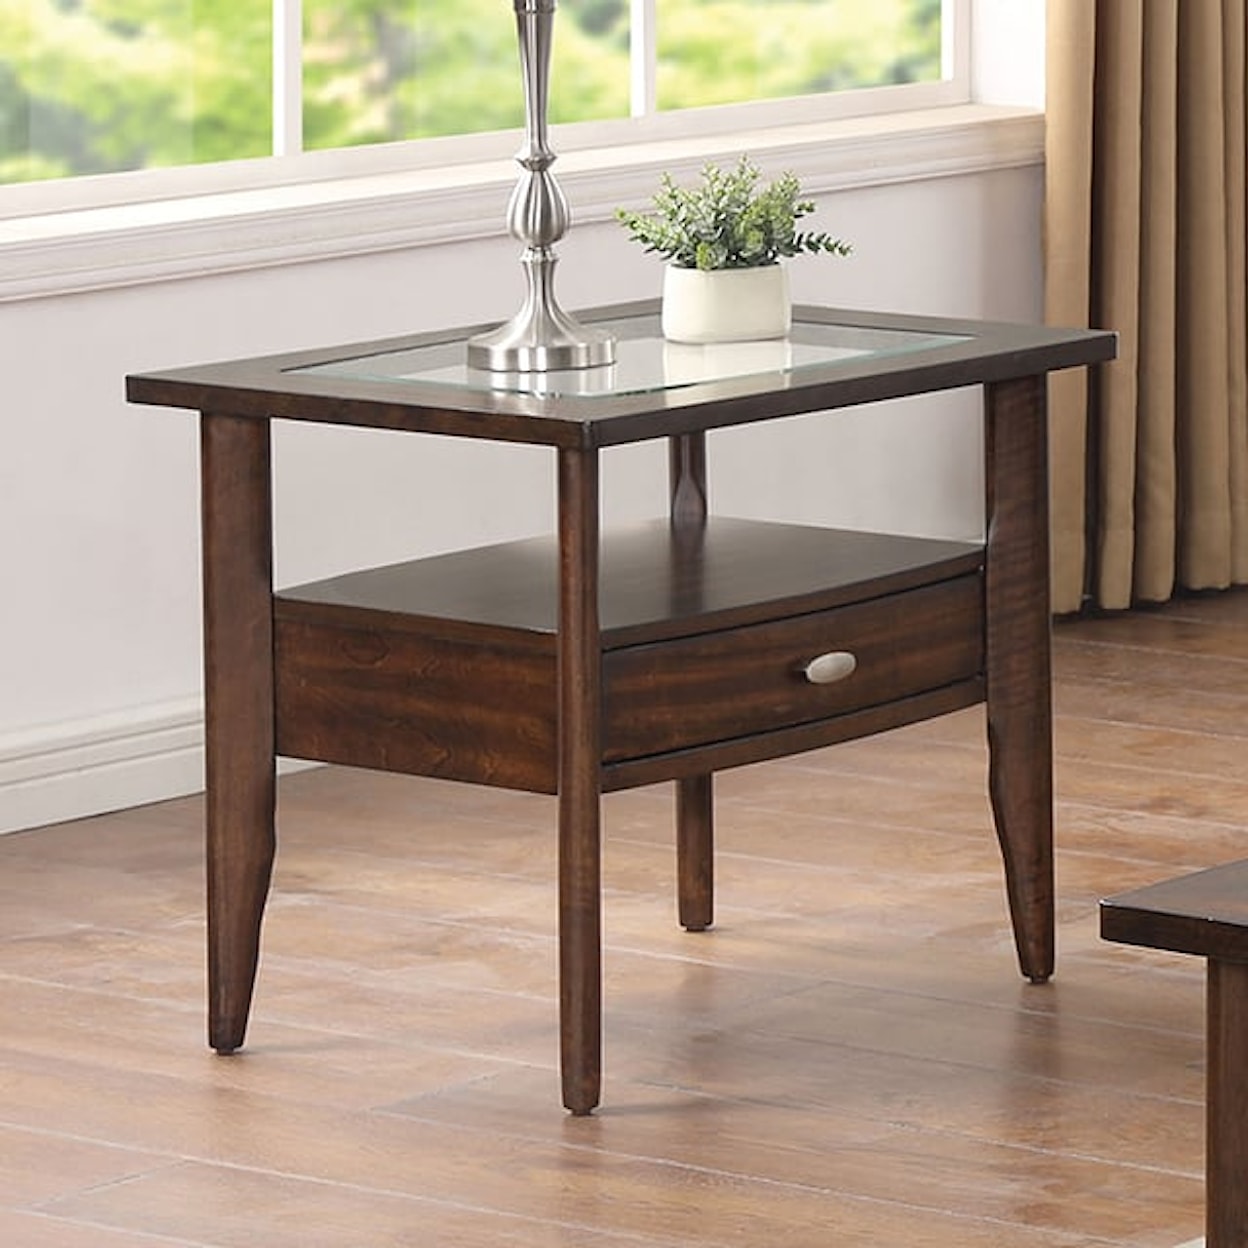 Furniture of America Riverdale Dark Walnut End Table with Glass Top